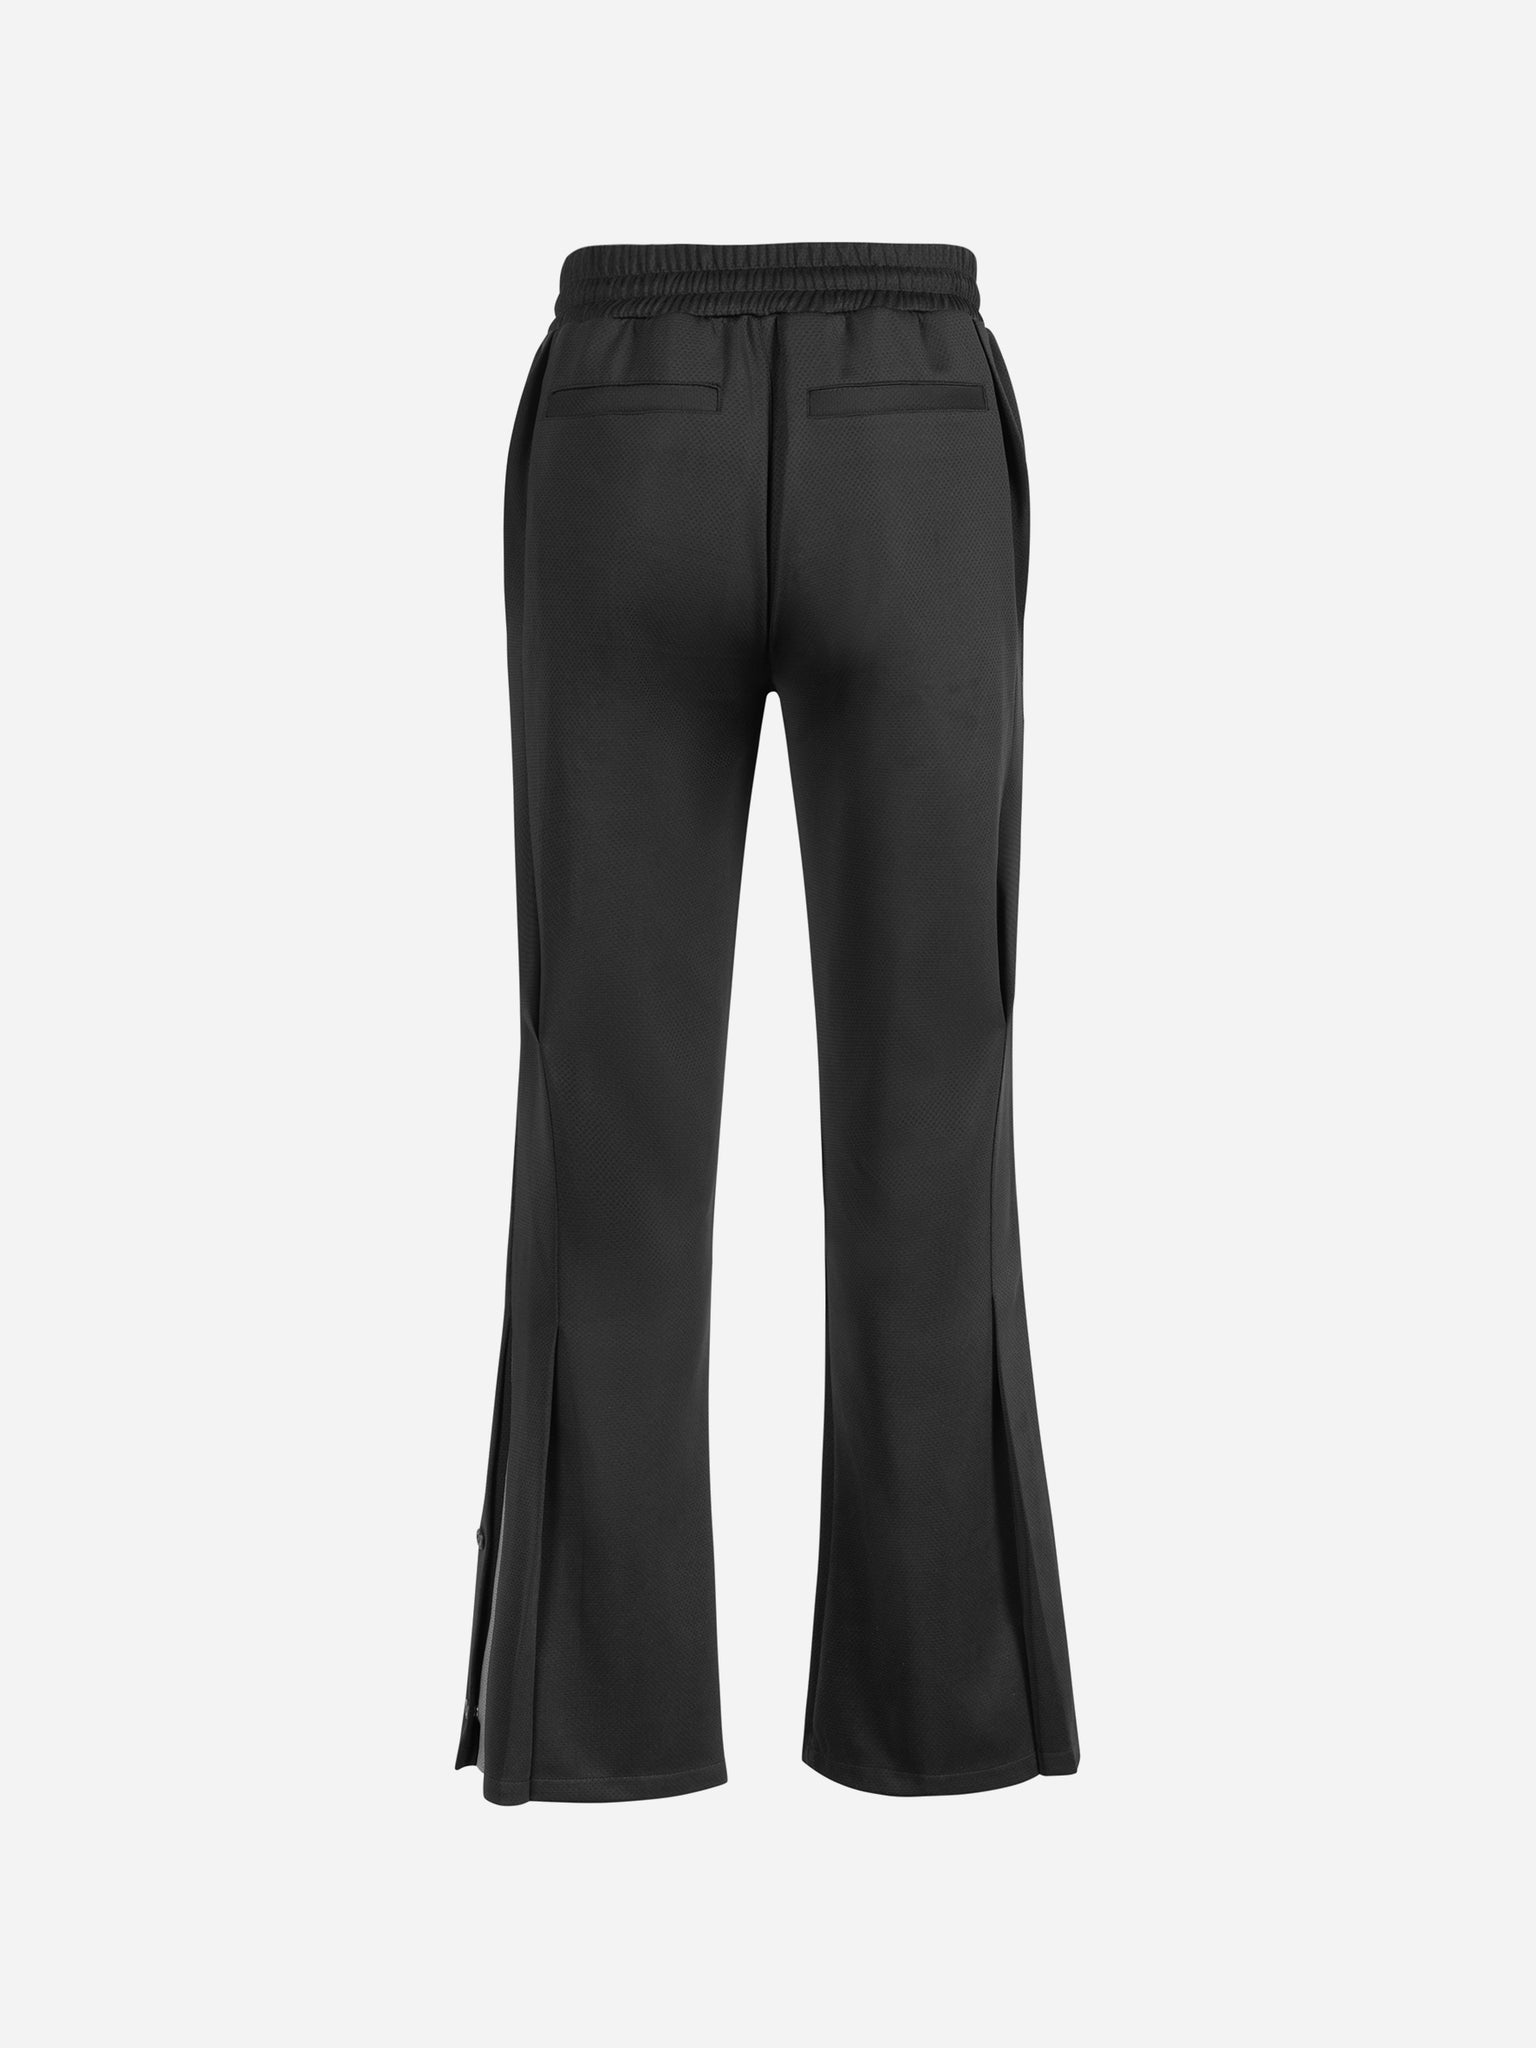 Fralet Fitted Track Pants with Contrast Panel